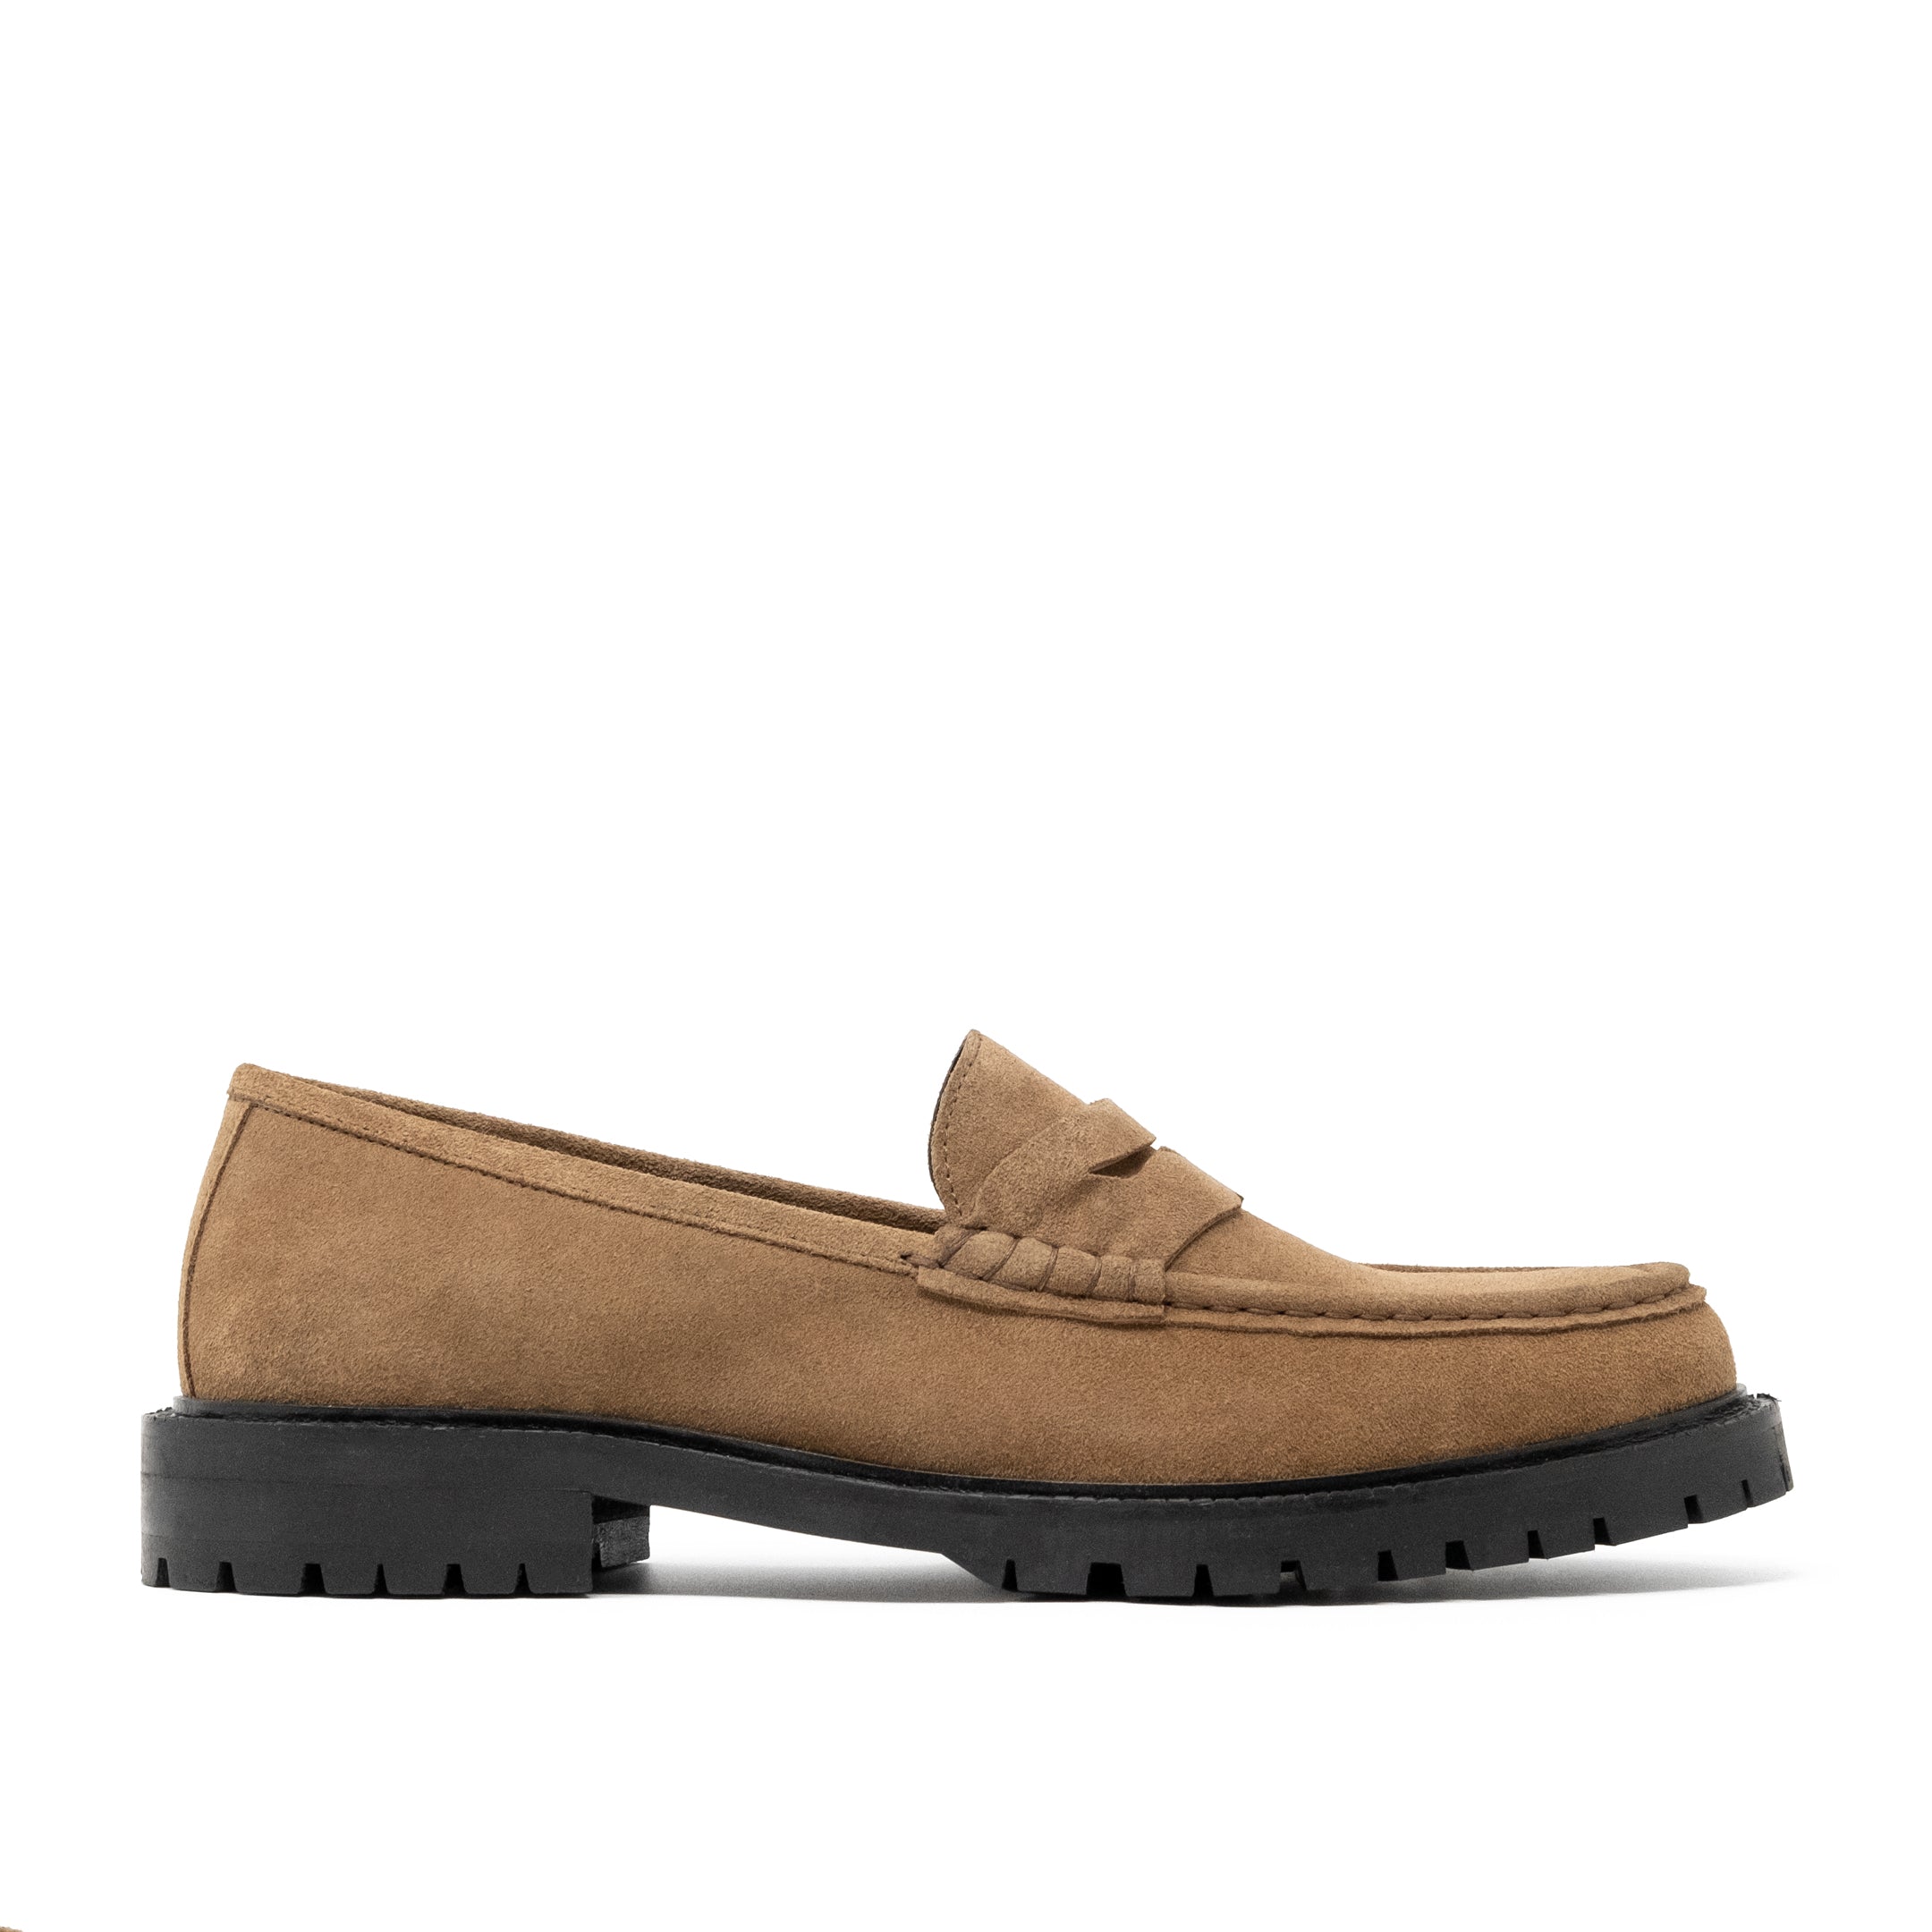 Walk London Campus Saddle Loafer in Tan Suede